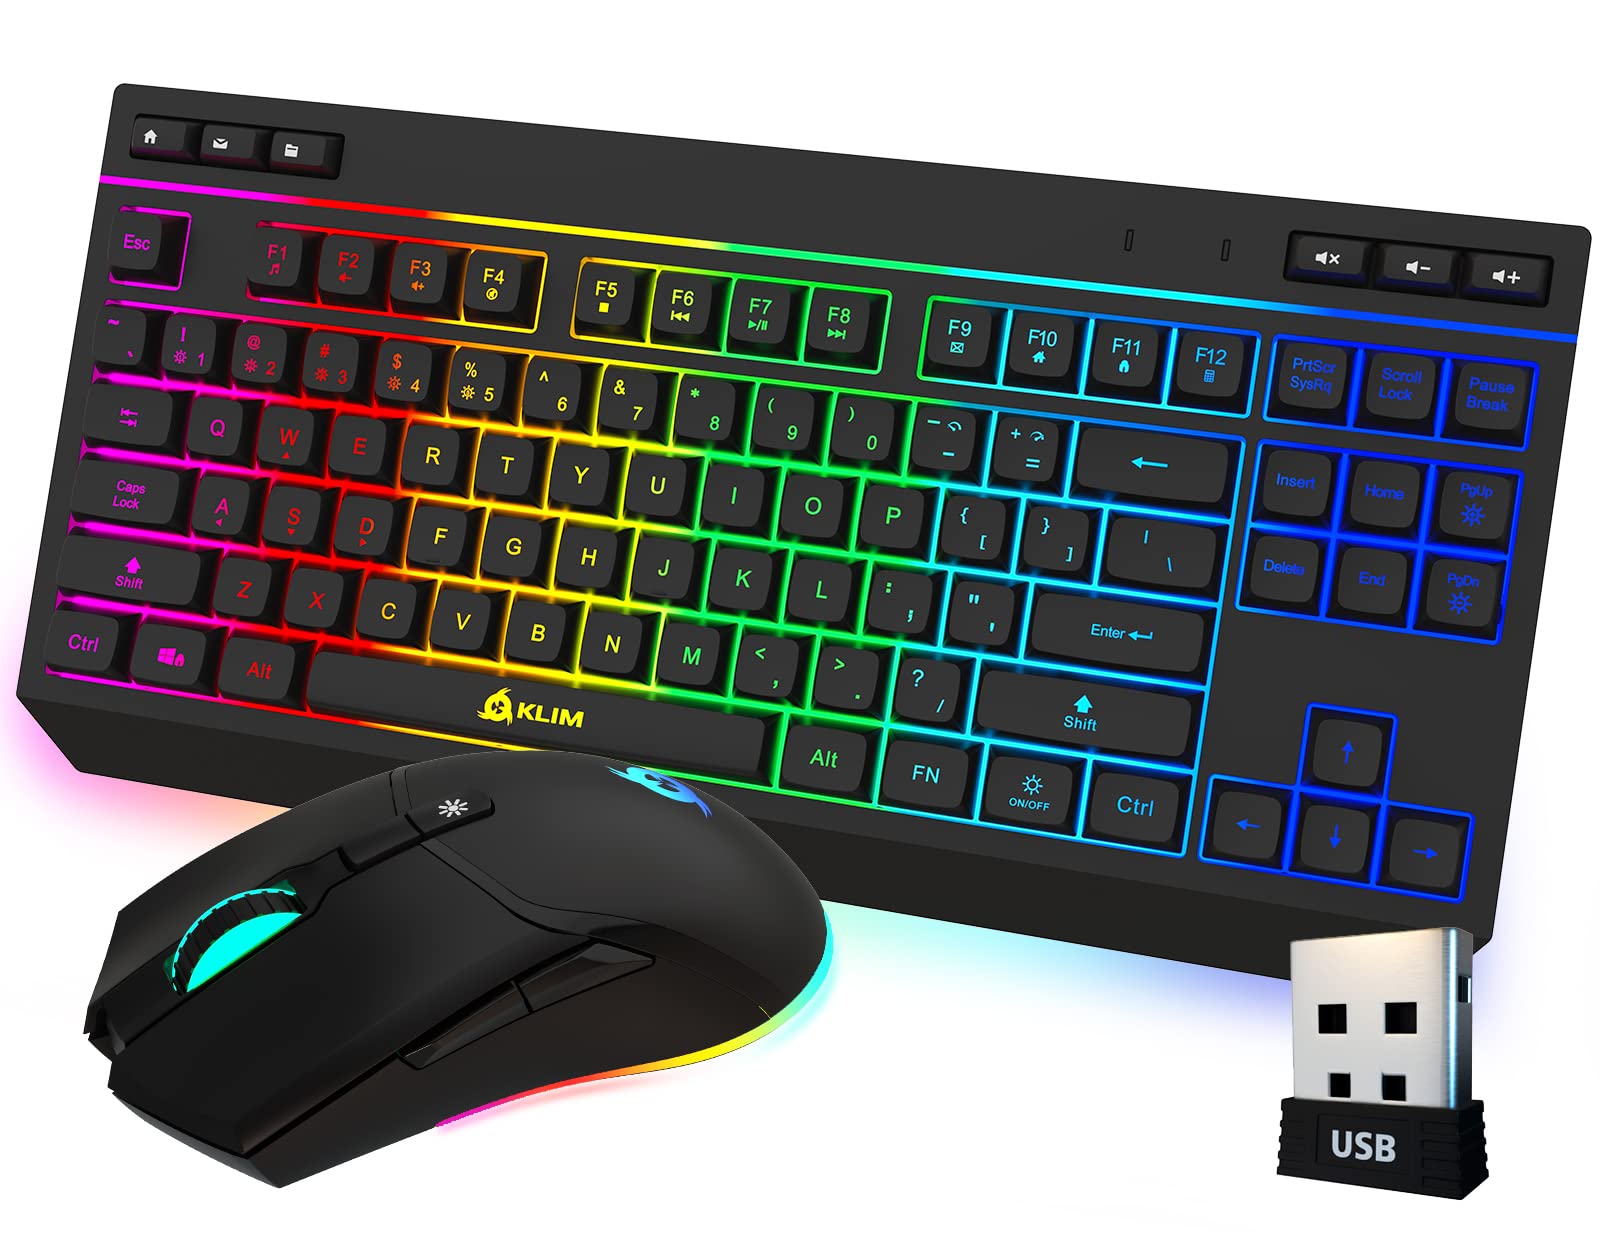 KLIM Duo - New 2023 Wireless Gaming Keyboard and Mouse Combo - Compact Durable Ergonomic - Silent Backlit TKL Keyboard - RGB Gaming Mouse Wireless - Long-Lasting Built-in Battery